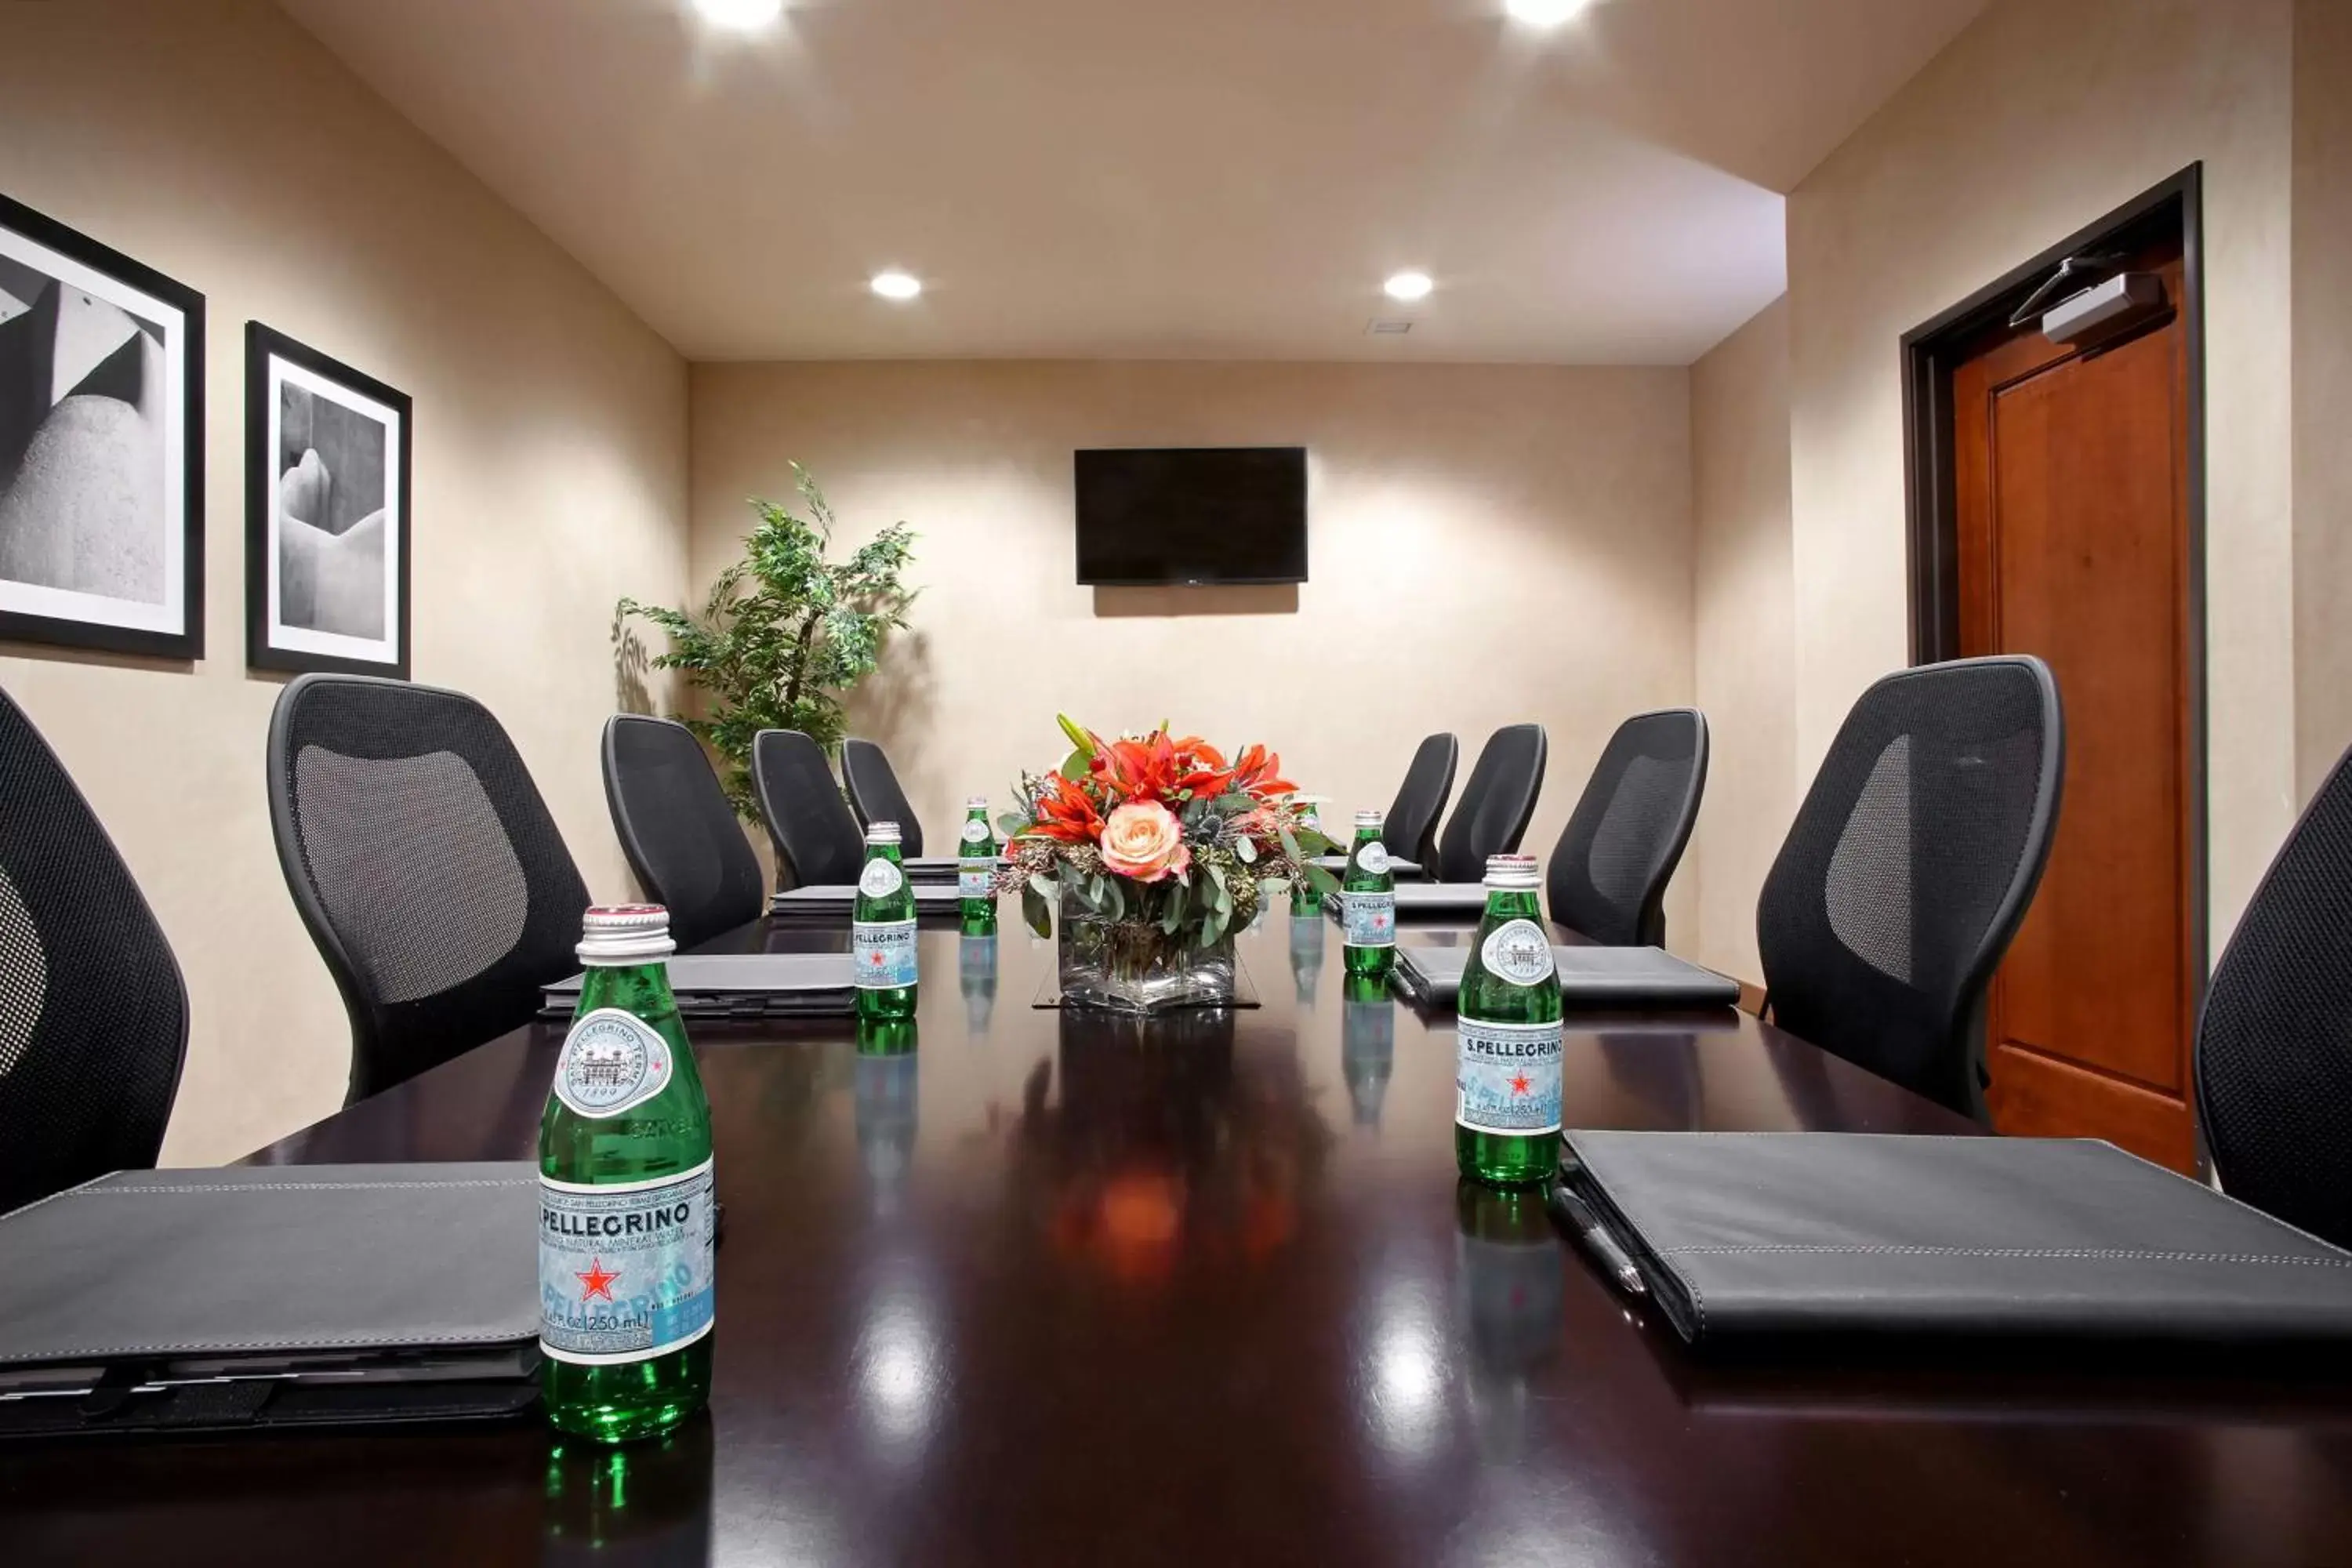 On site, Business Area/Conference Room in Drury Plaza Hotel in Santa Fe